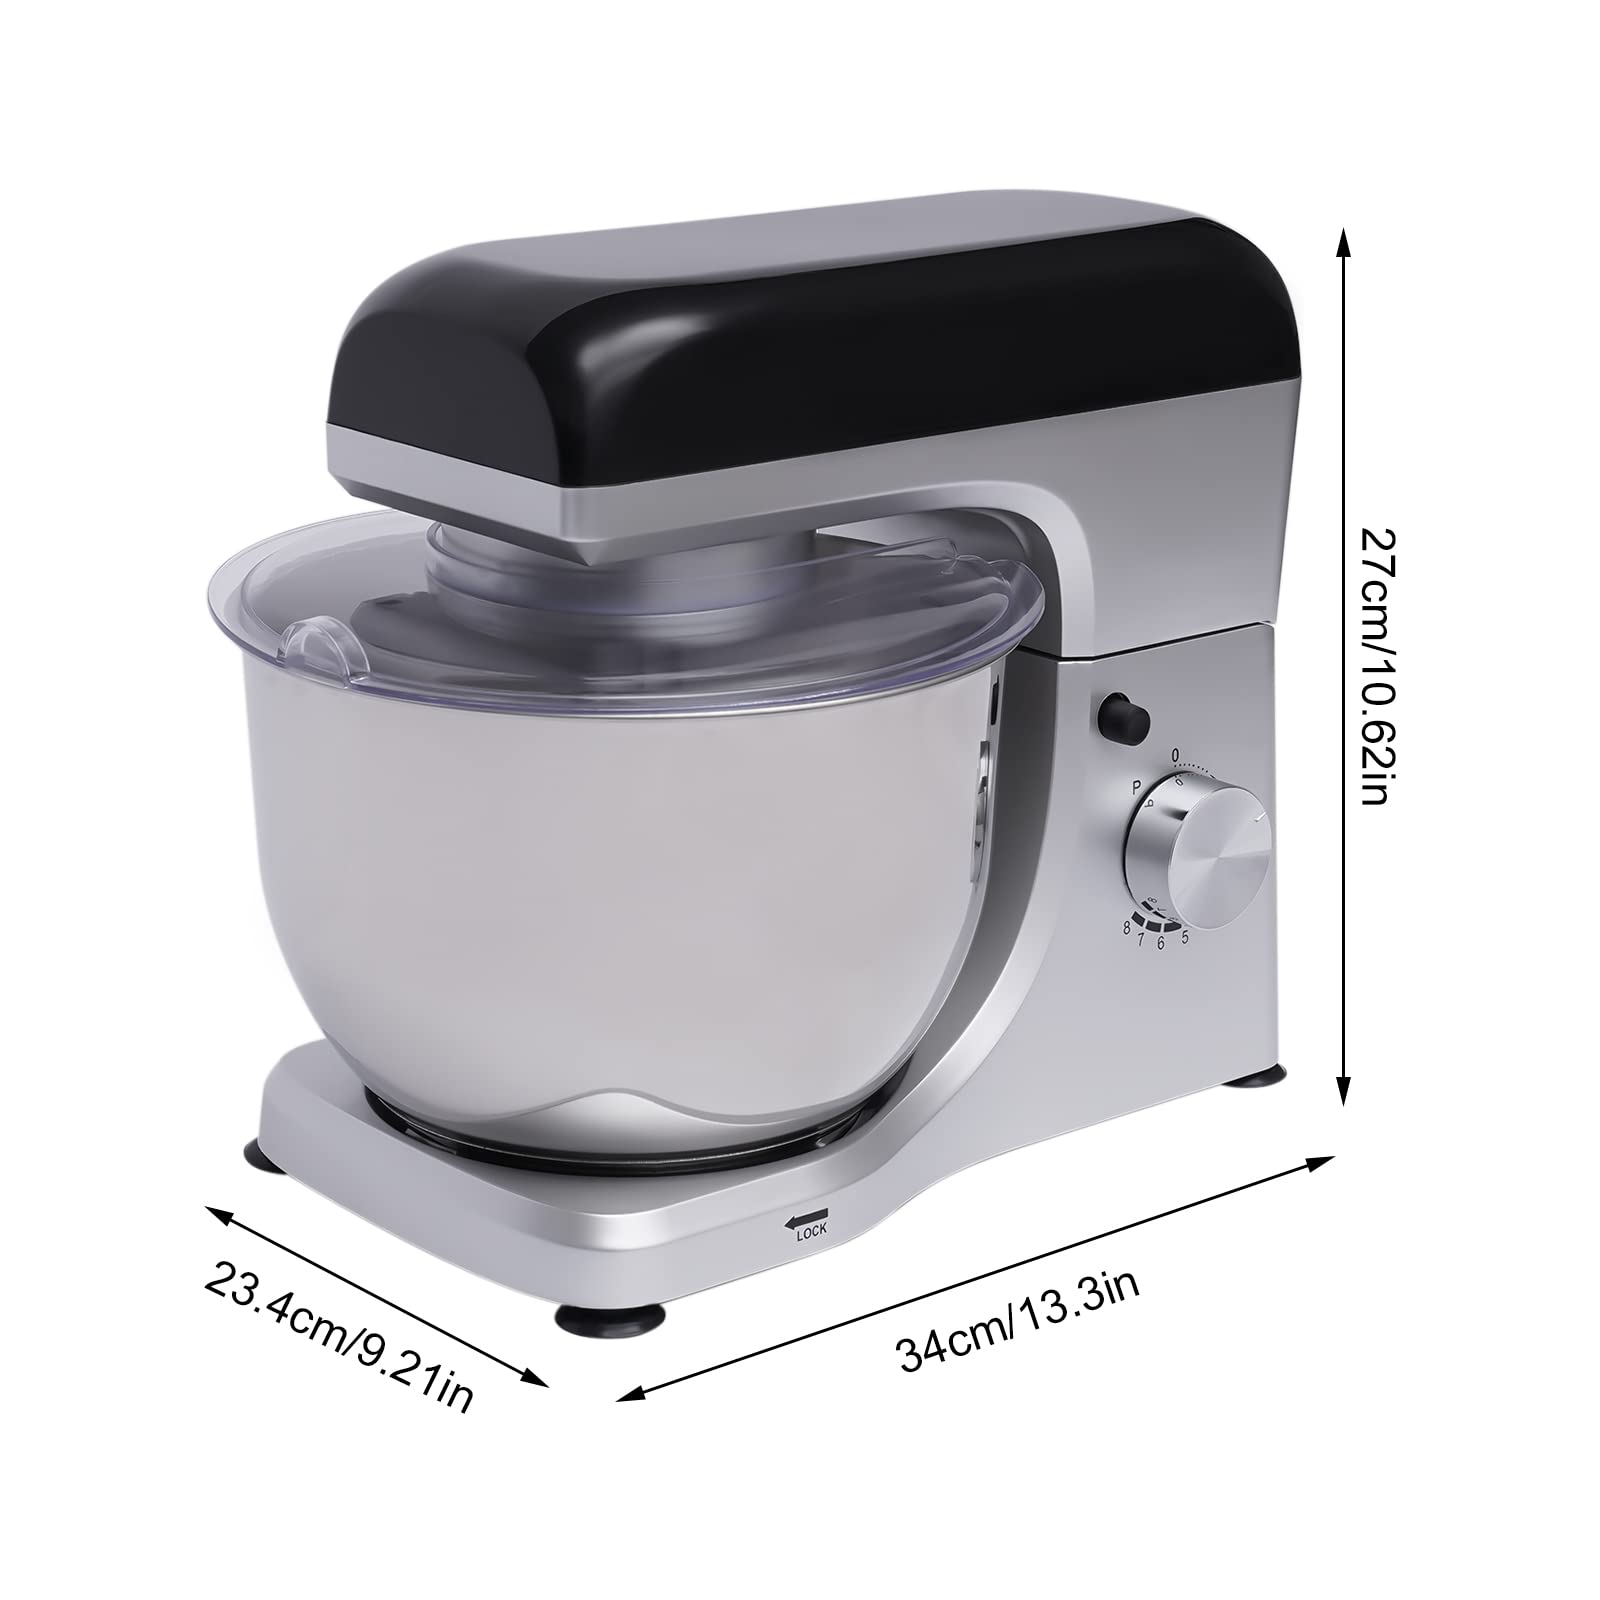 4.8Qt Standing Mixer, 500W Electric Food Stand Mixer with Splash Proof Cover, Adjustable Speeds Dough Mixer for Kneading Dough, Stirring Jams, Whipping Cream